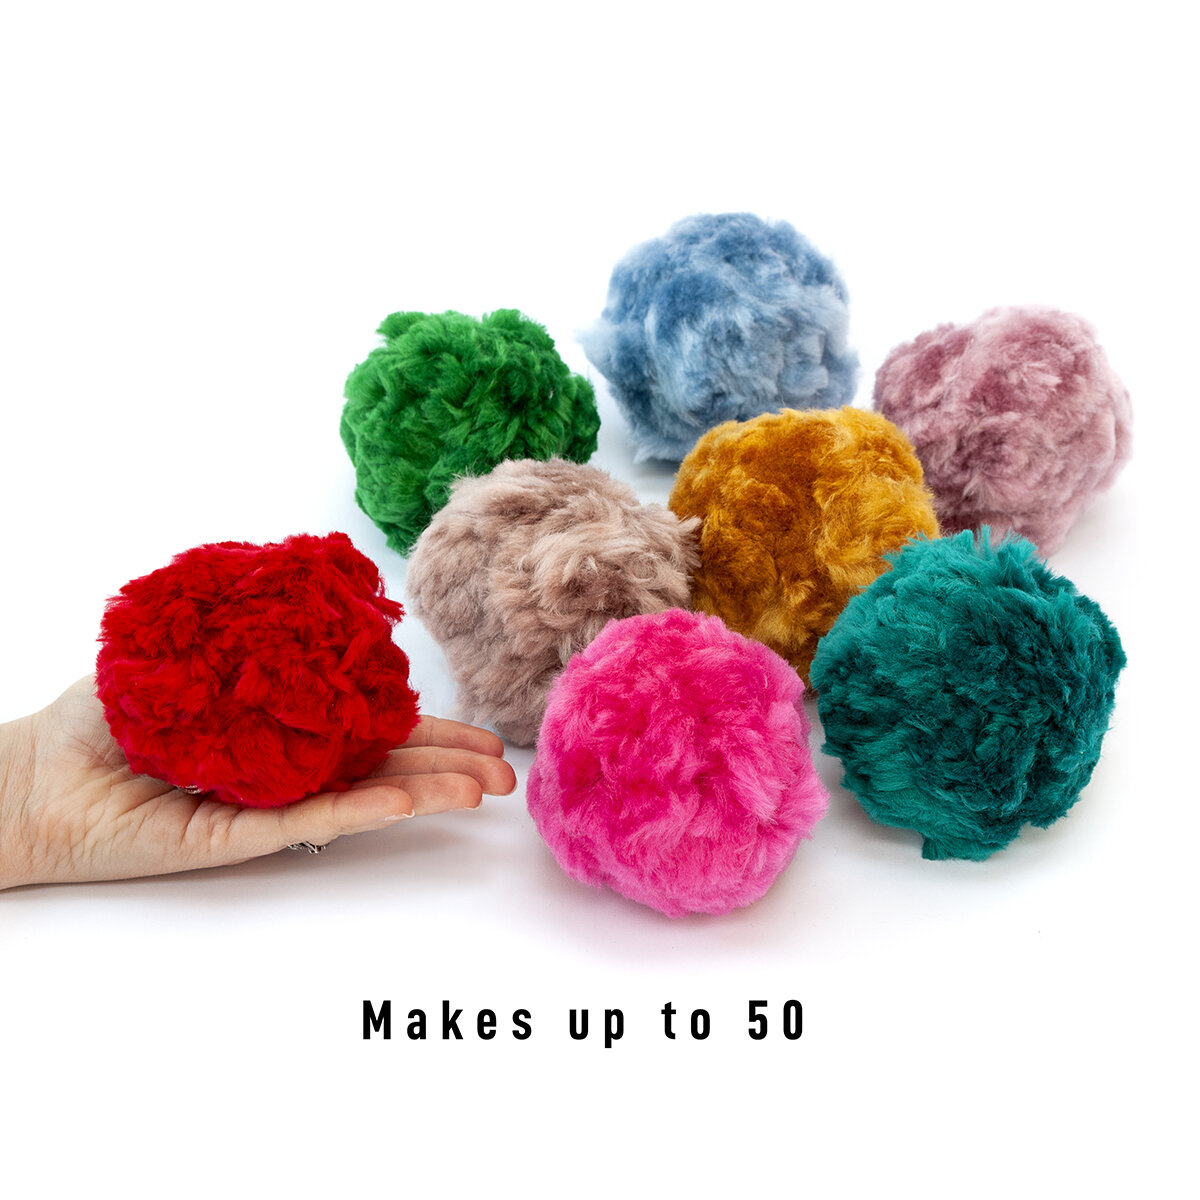 Make up to 50 Pom Poms (approx. 8cm wide) KIT mammoth